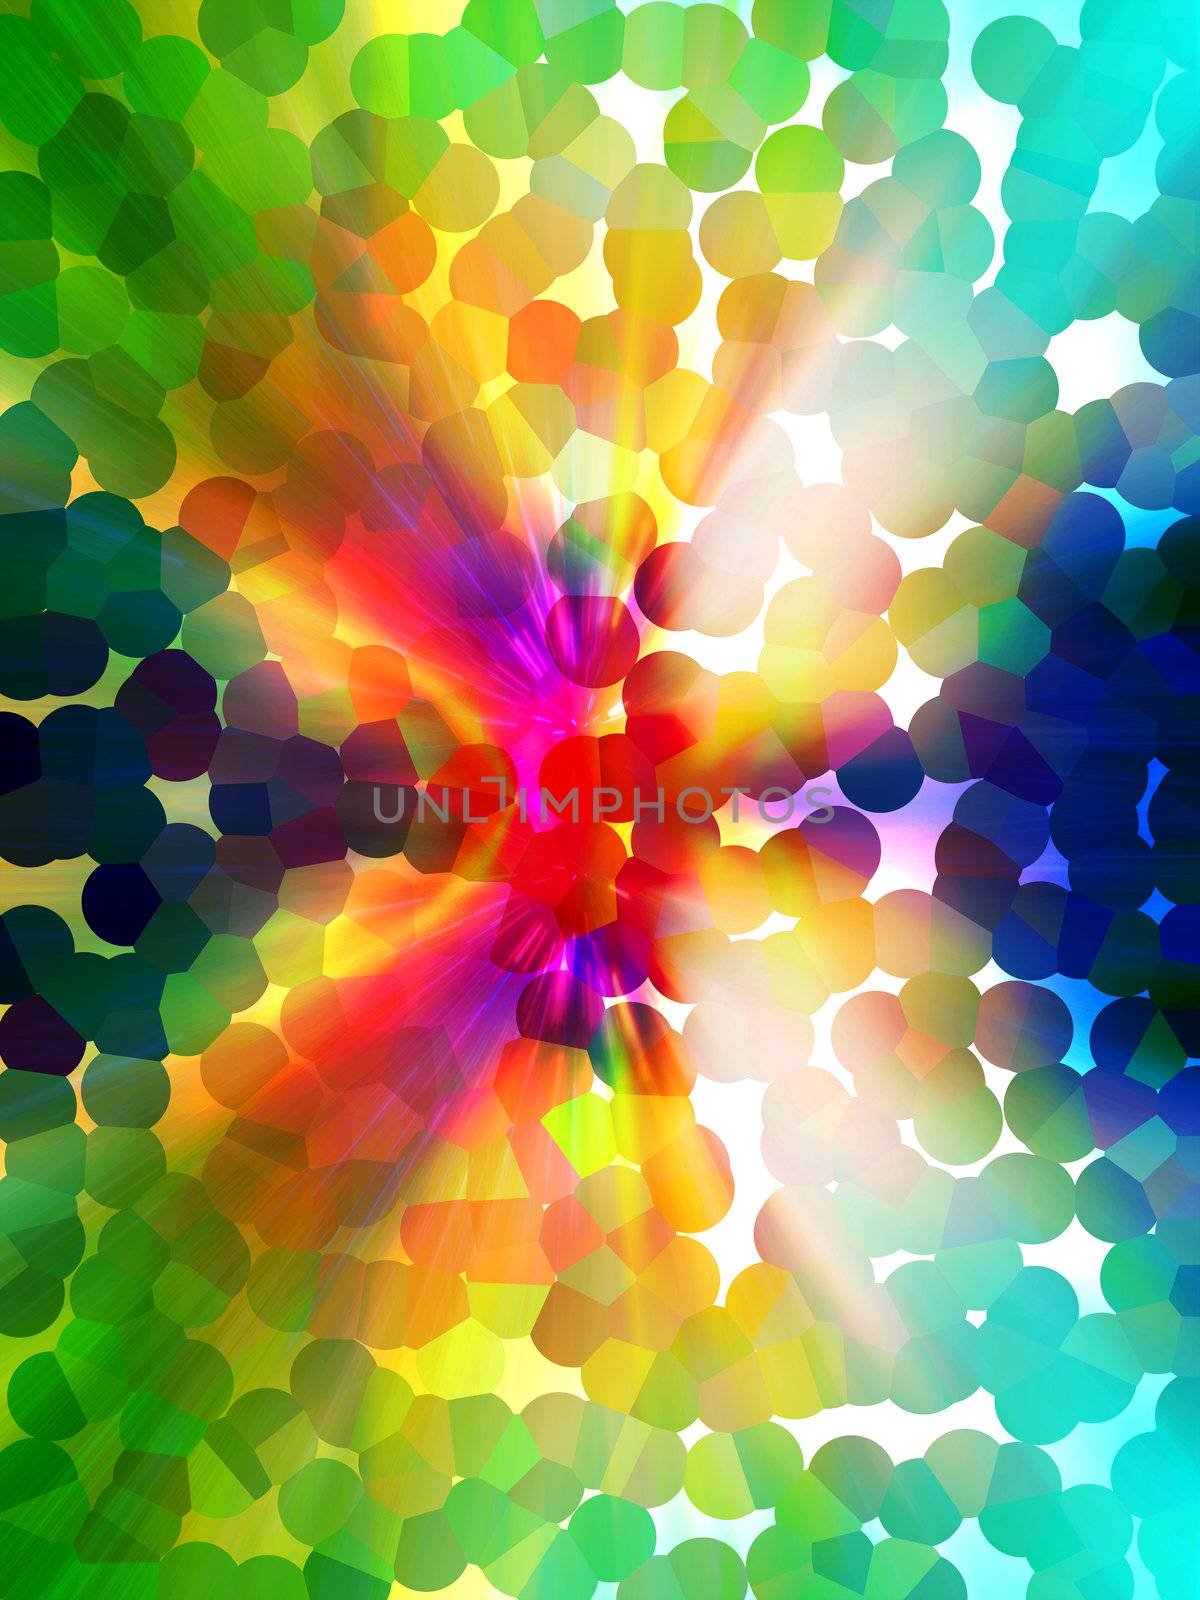 Abstract colourful design with colored dots and rays of light